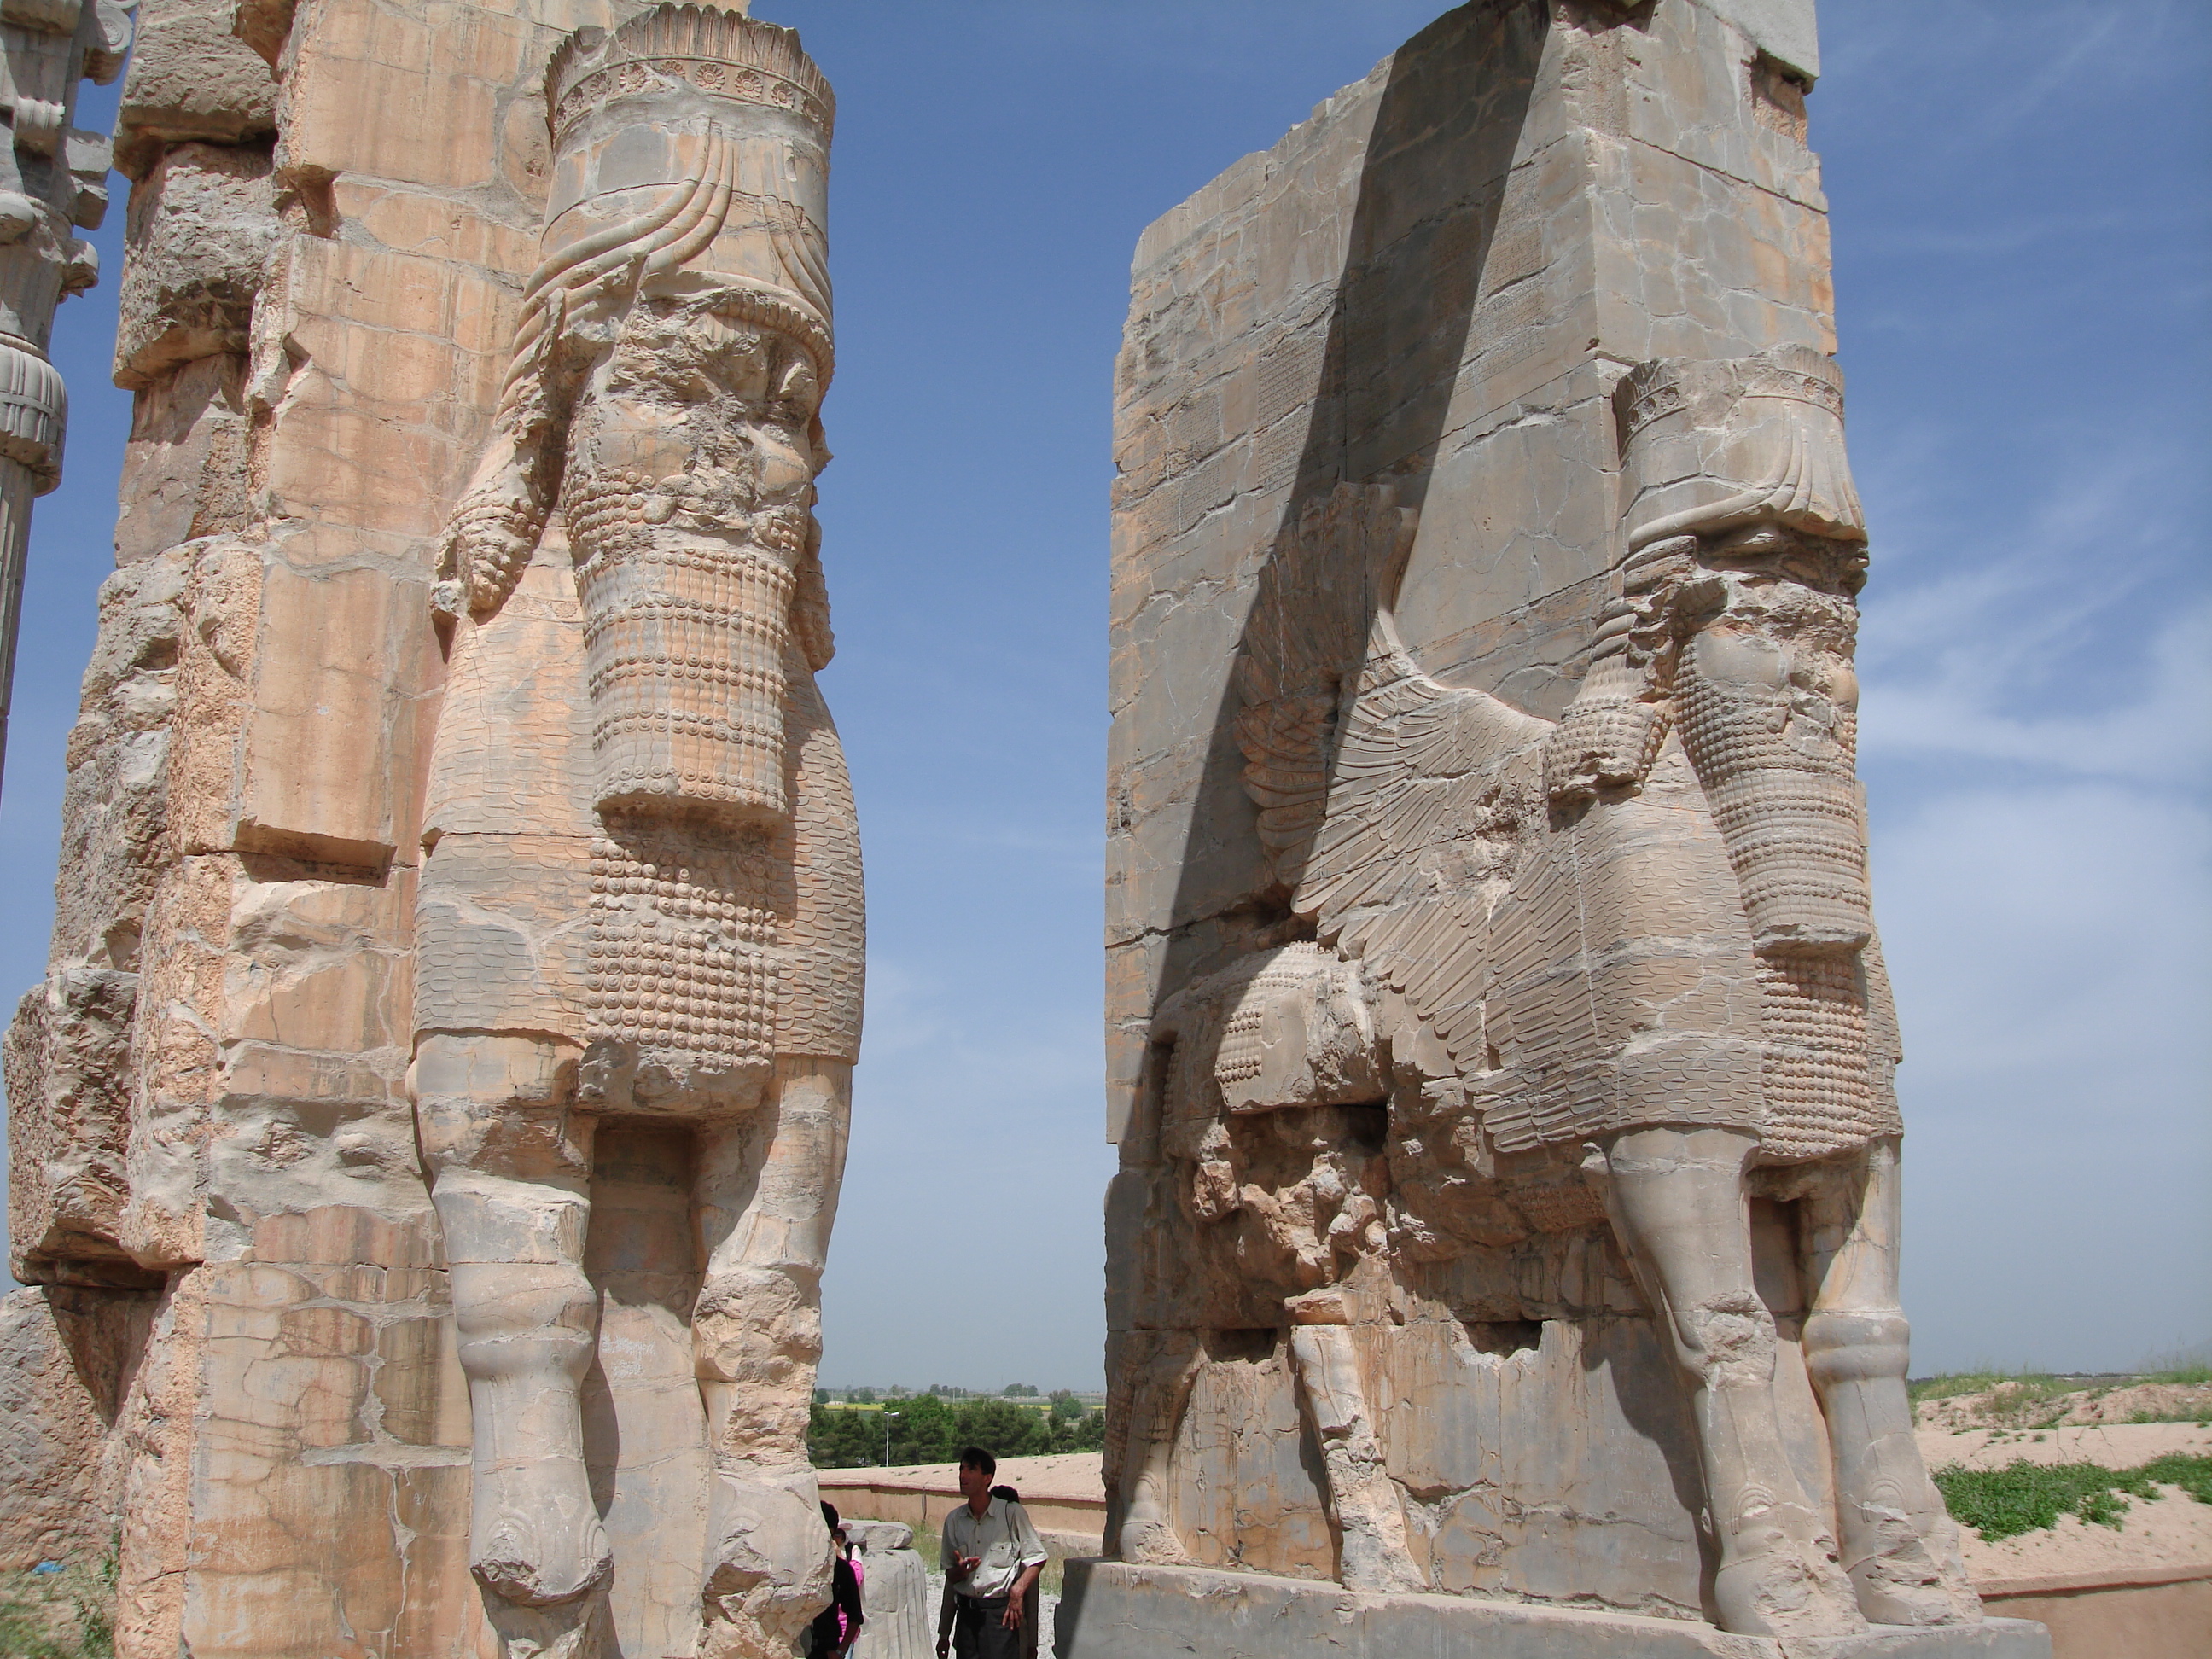 Guardians to the gates of Persepolis